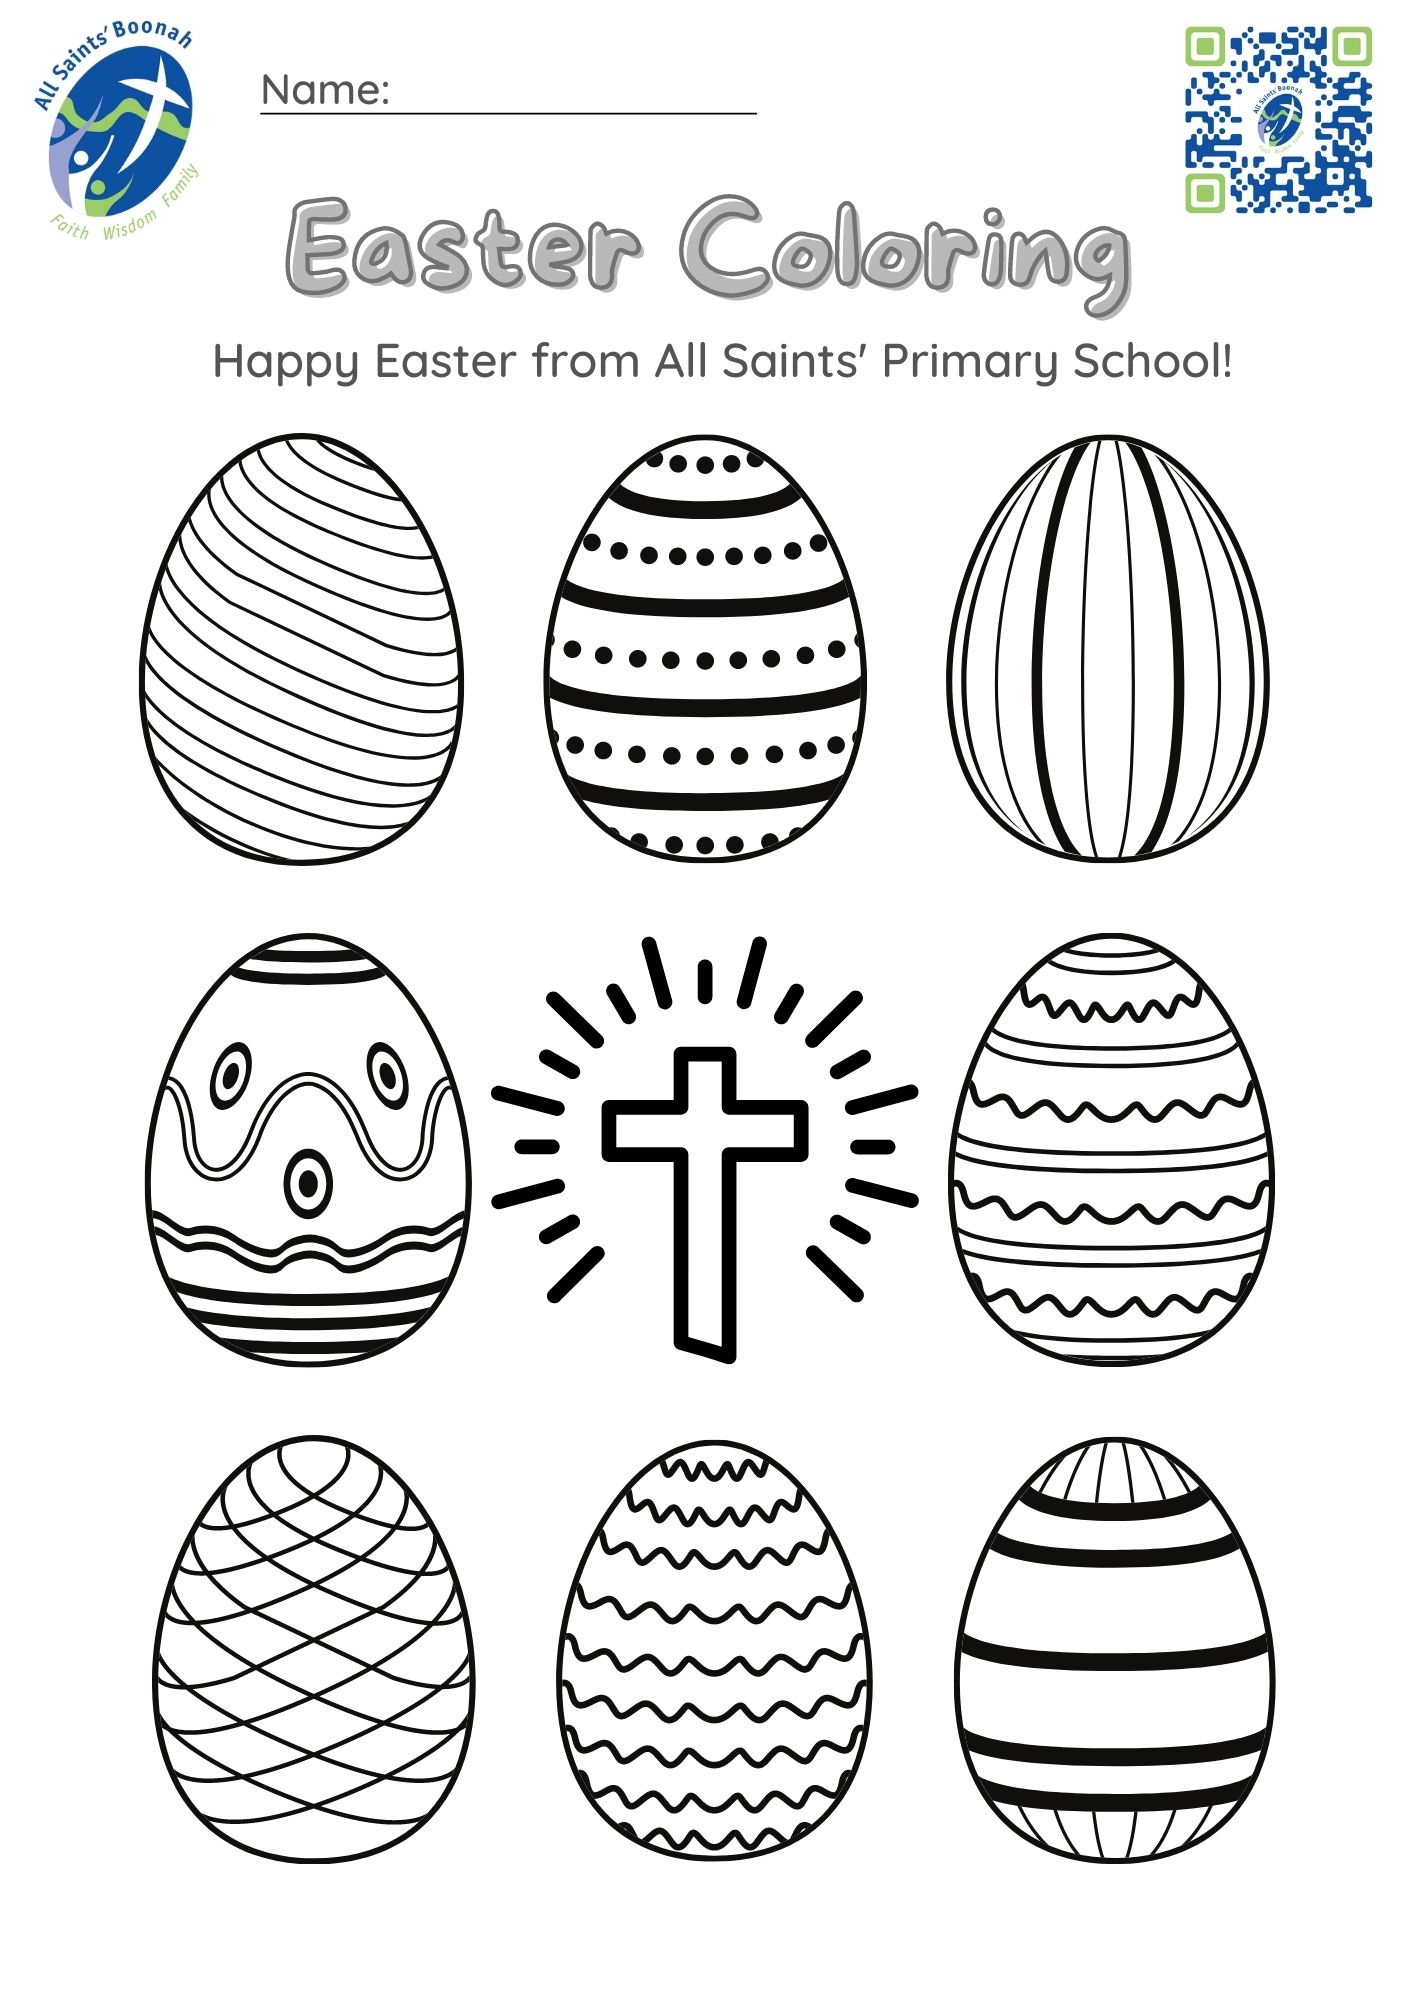 ASB Easter Colouring In.jpg